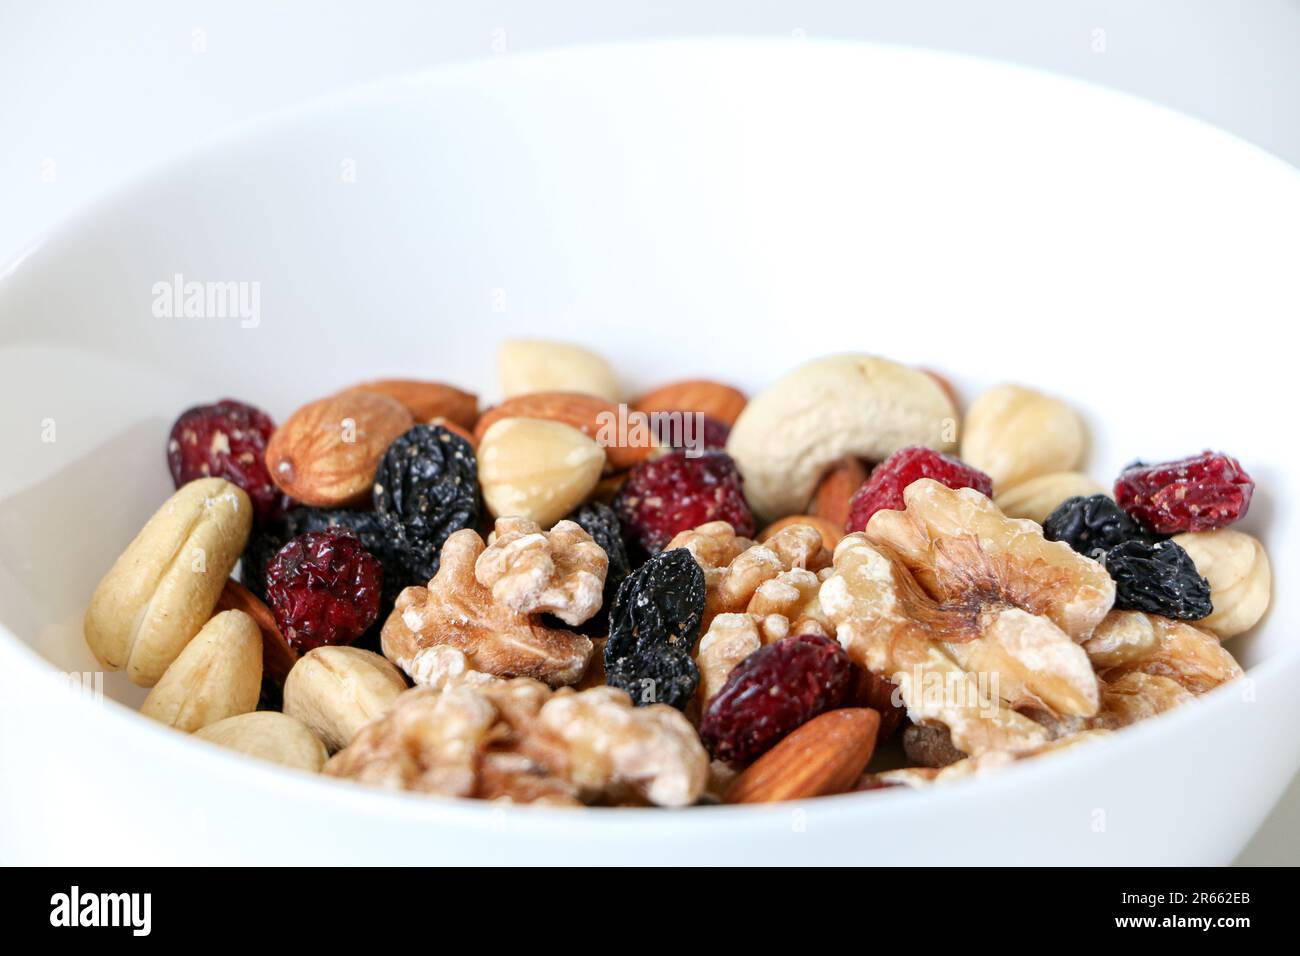 Close up of mixed nuts and dried fruits consisting of almonds, walnuts, hazelnuts, cashew nuts, raisins and cranberries with copy space above, healthy Stock Photo